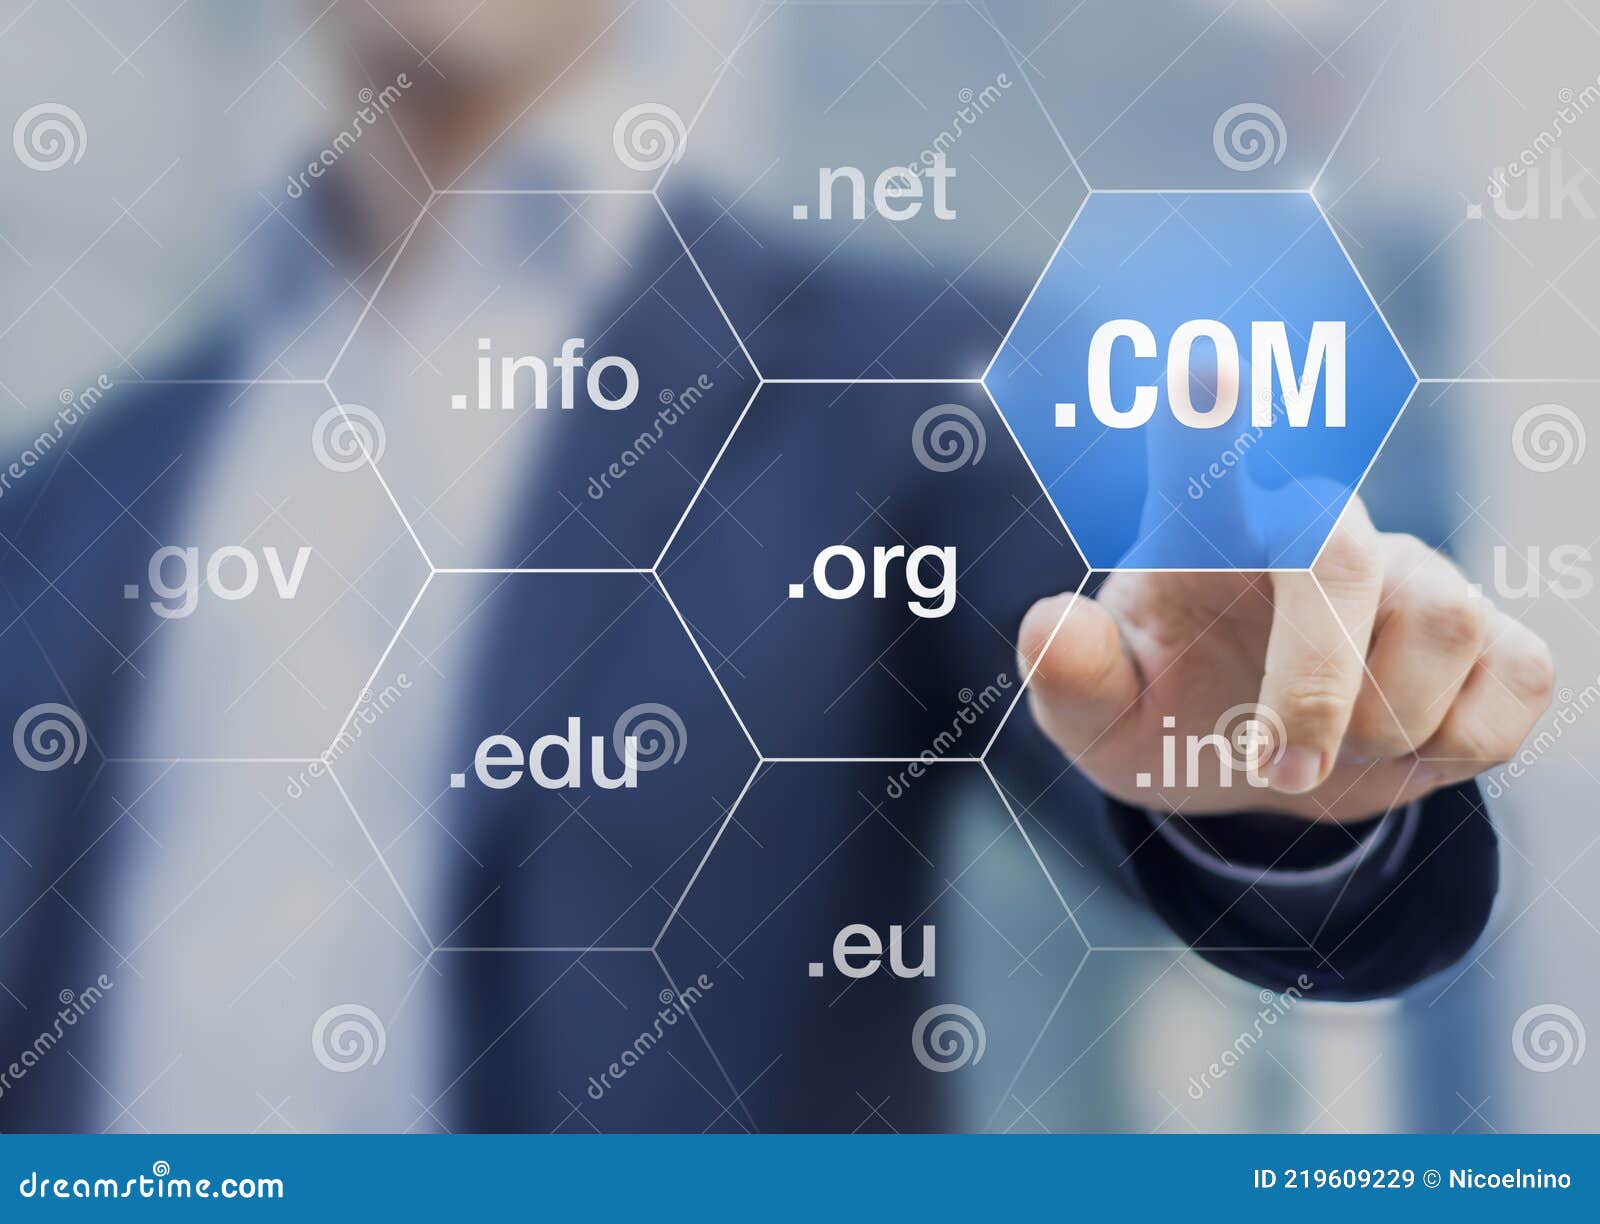 concept about international domain names on internet for websites